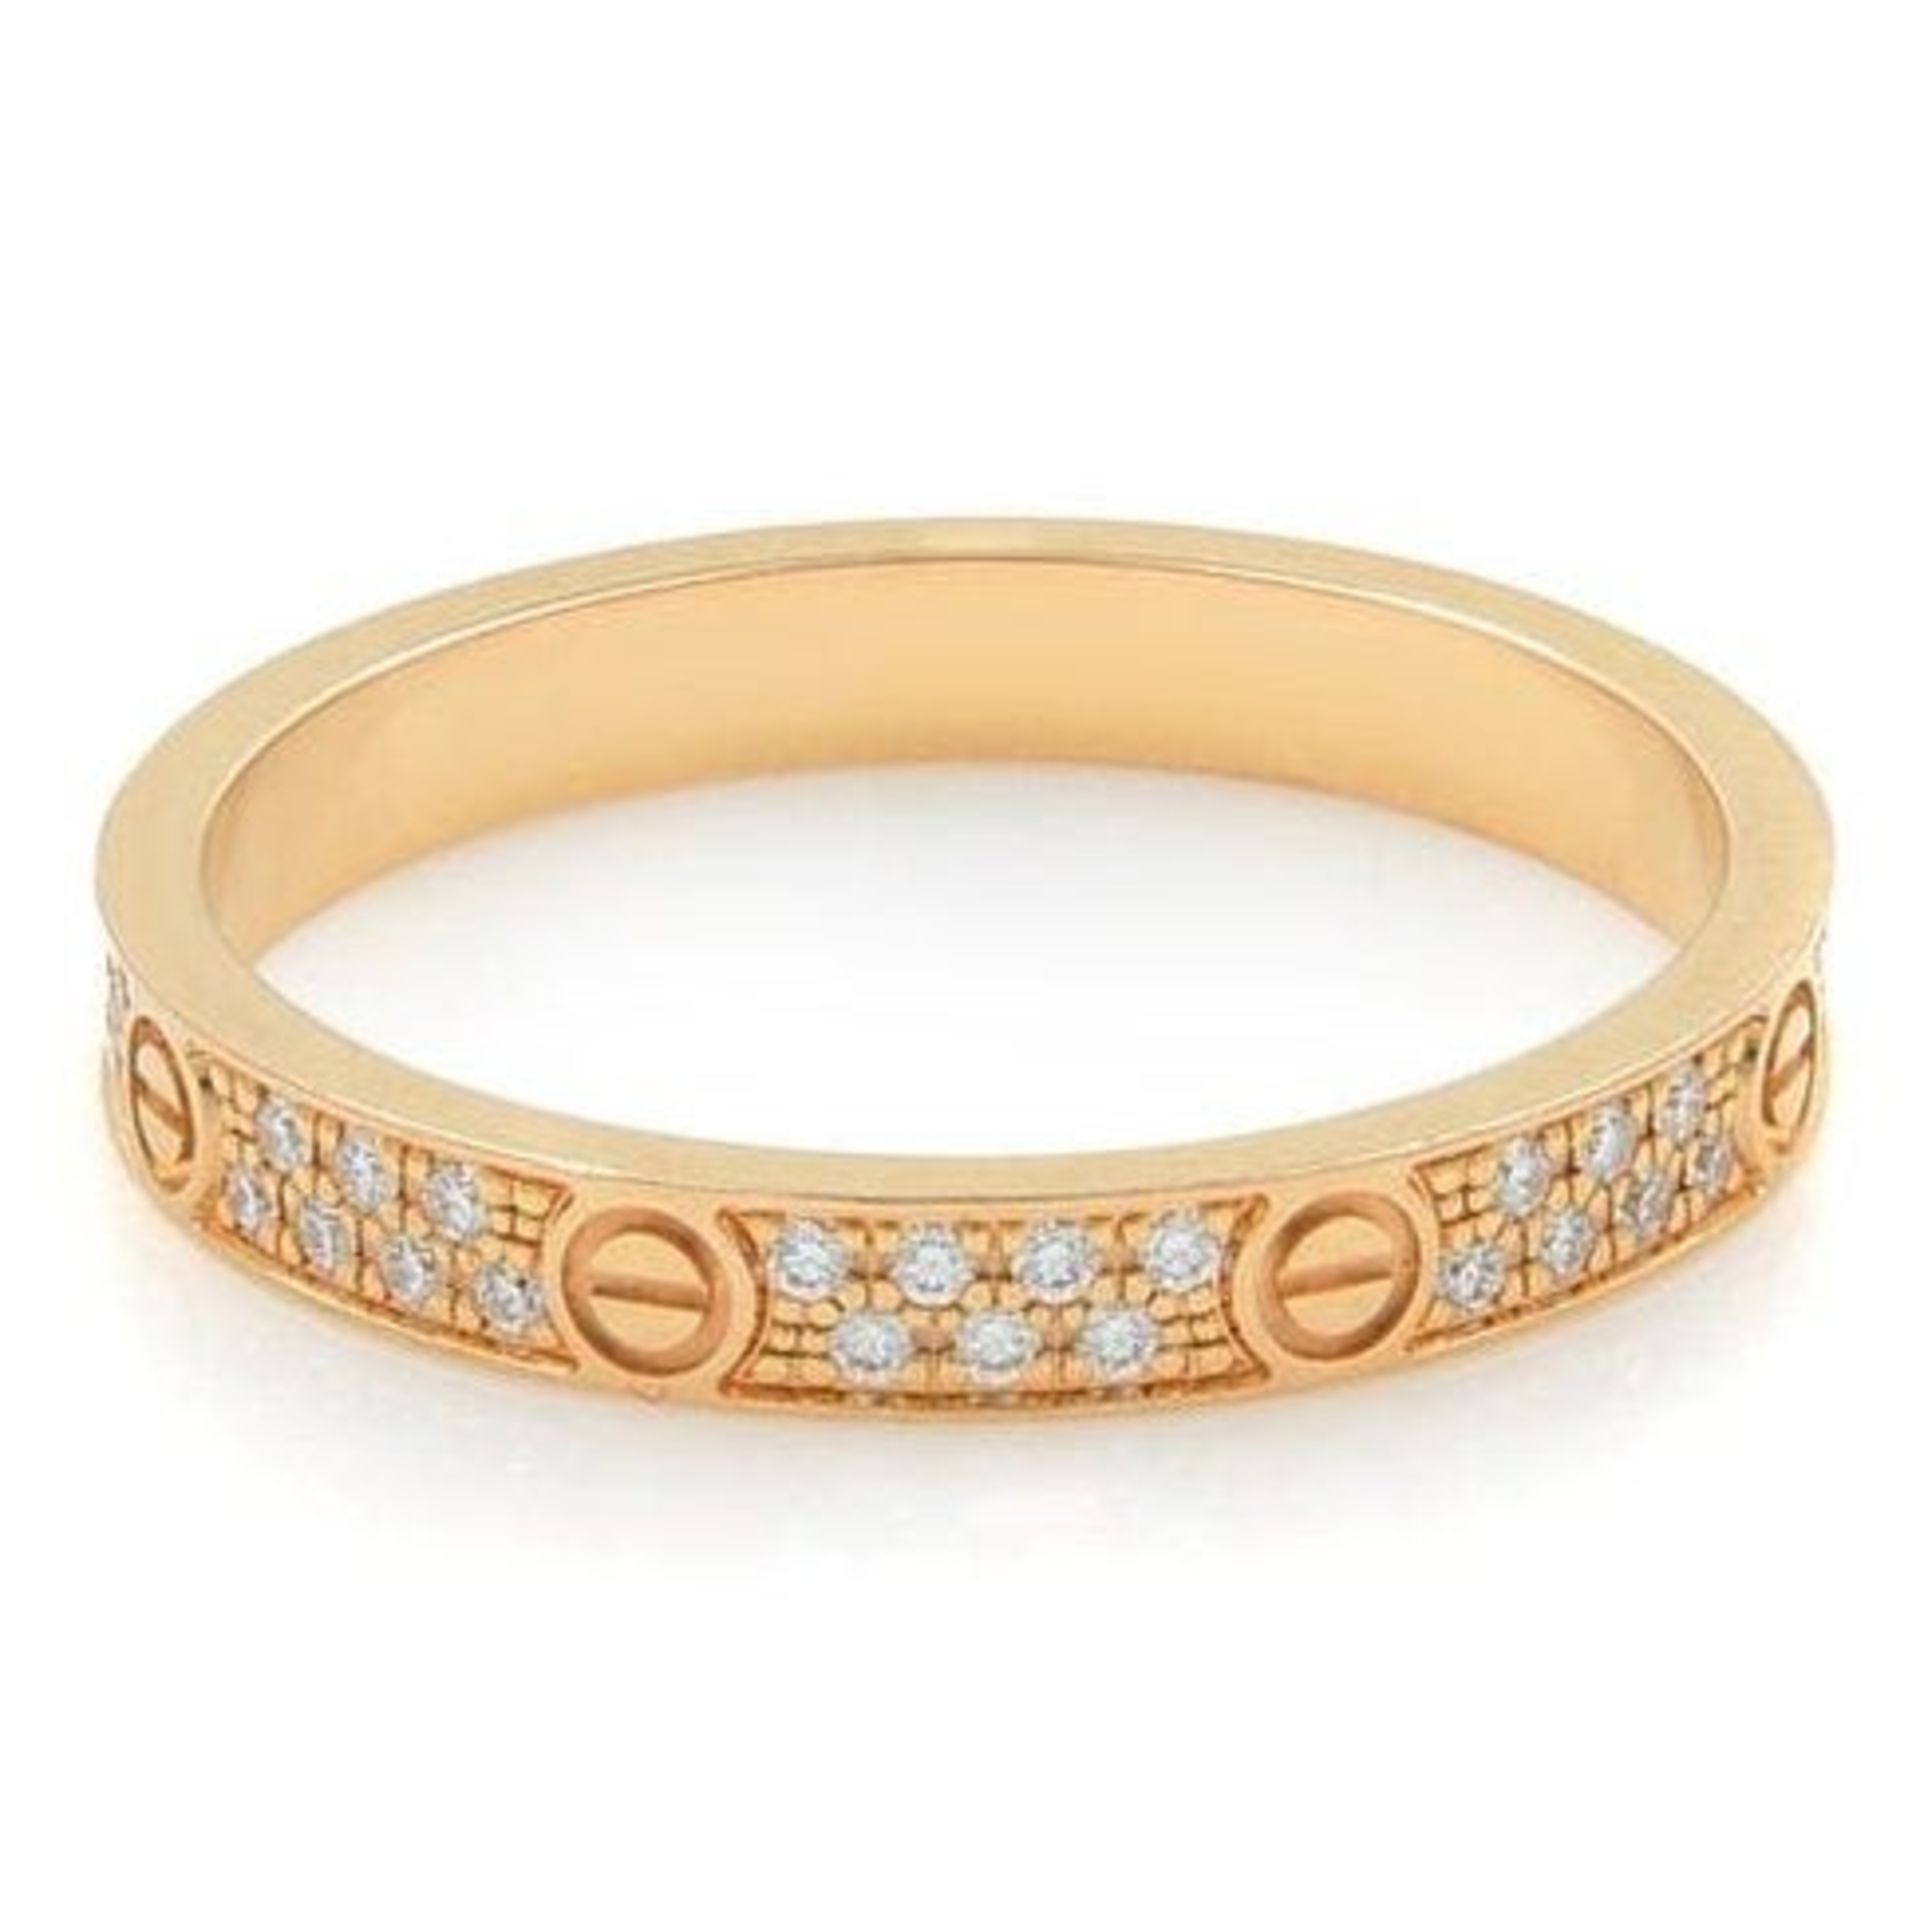 18 K / 750 Rose Gold CARTIER Style Eternity Diamond Band Ring